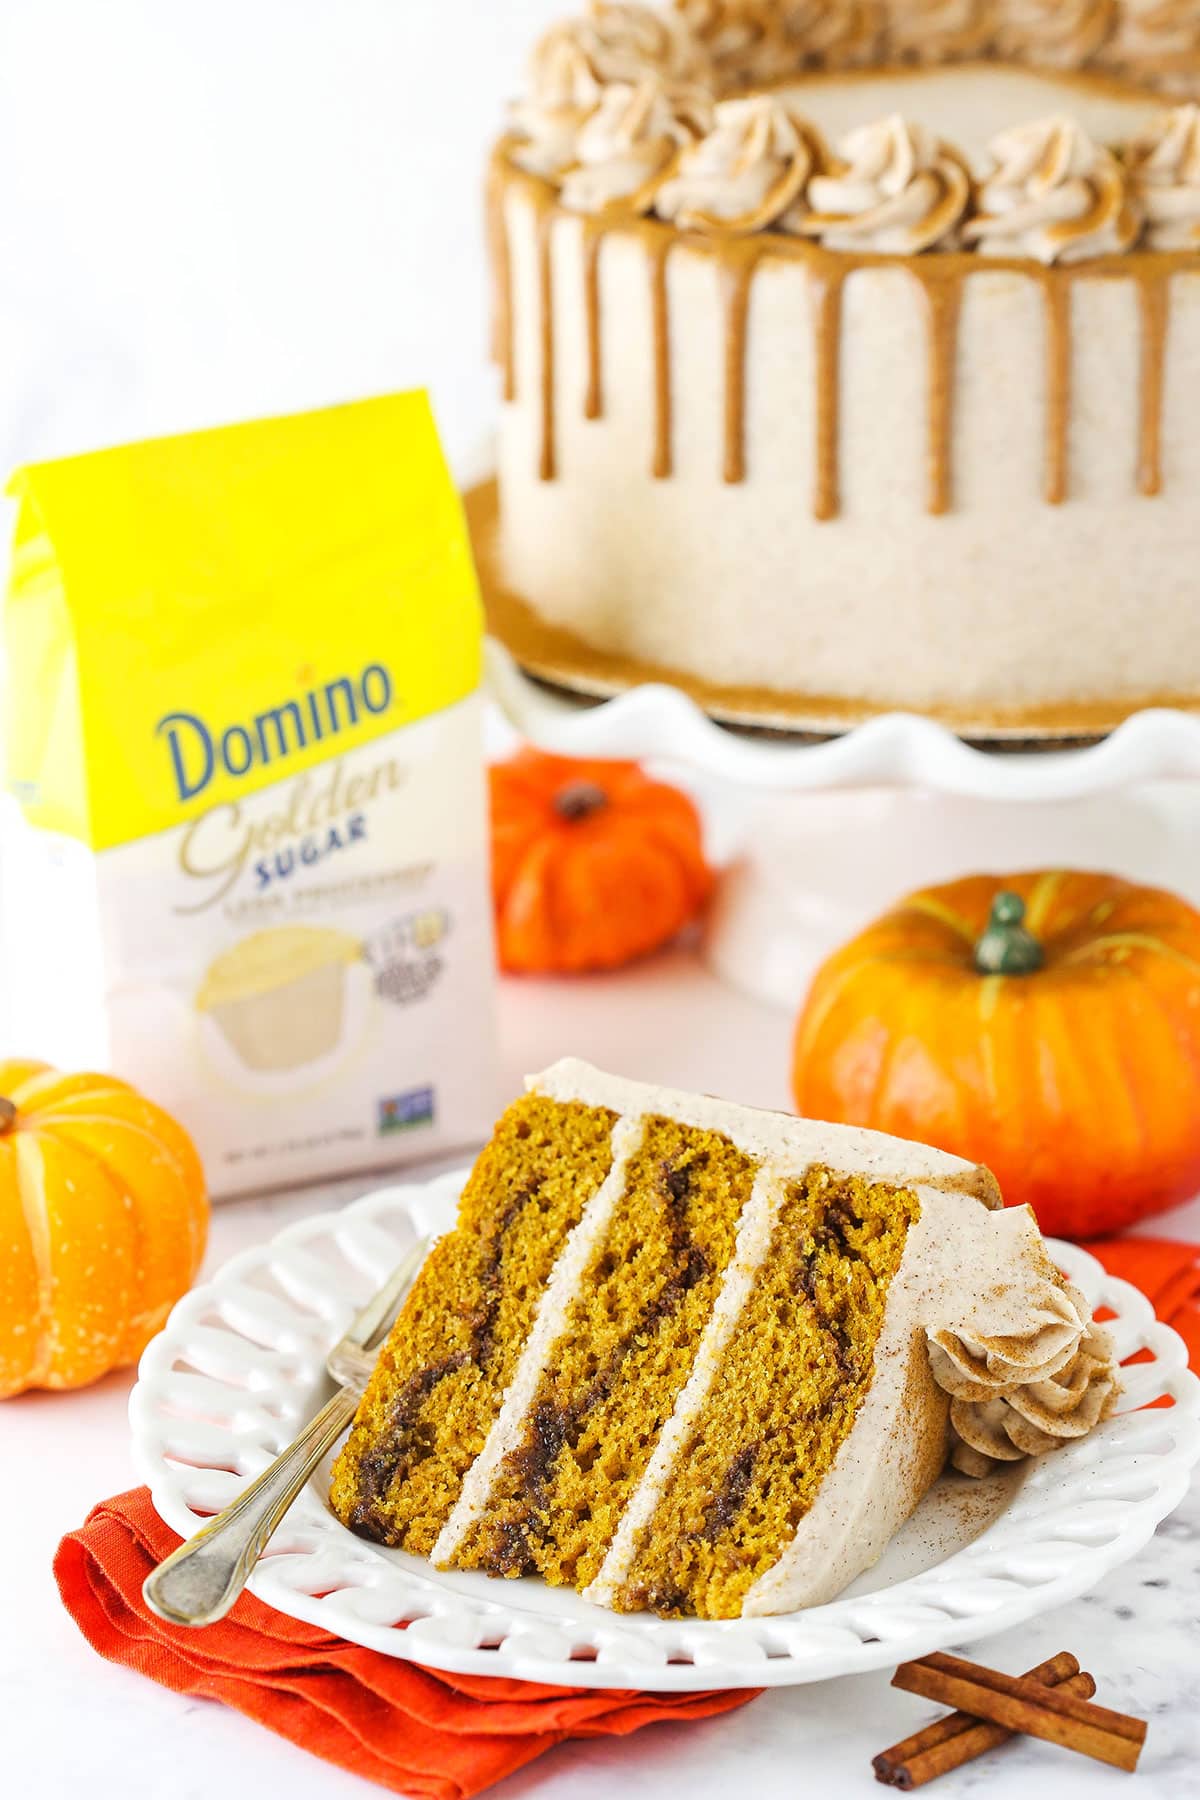 A slice of Cinnamon Sugar Swirl Pumpkin Layer Cake with cake and Domino golden sugar in the background.